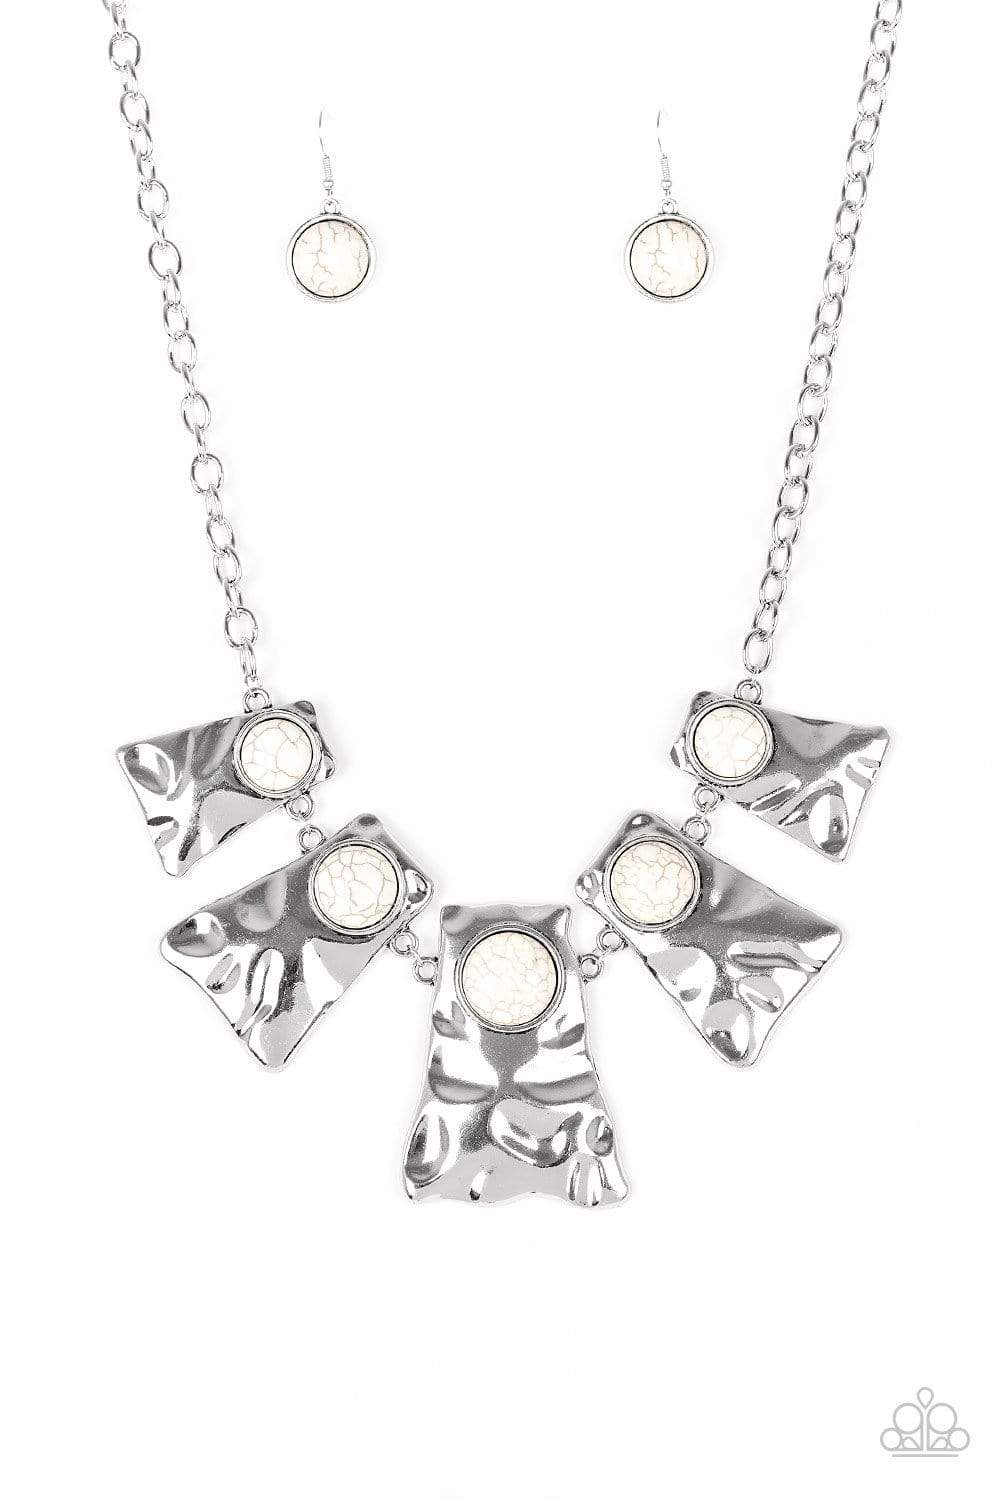 Paparazzi HEIRESS of Them All - White Necklace – A Finishing Touch Jewelry